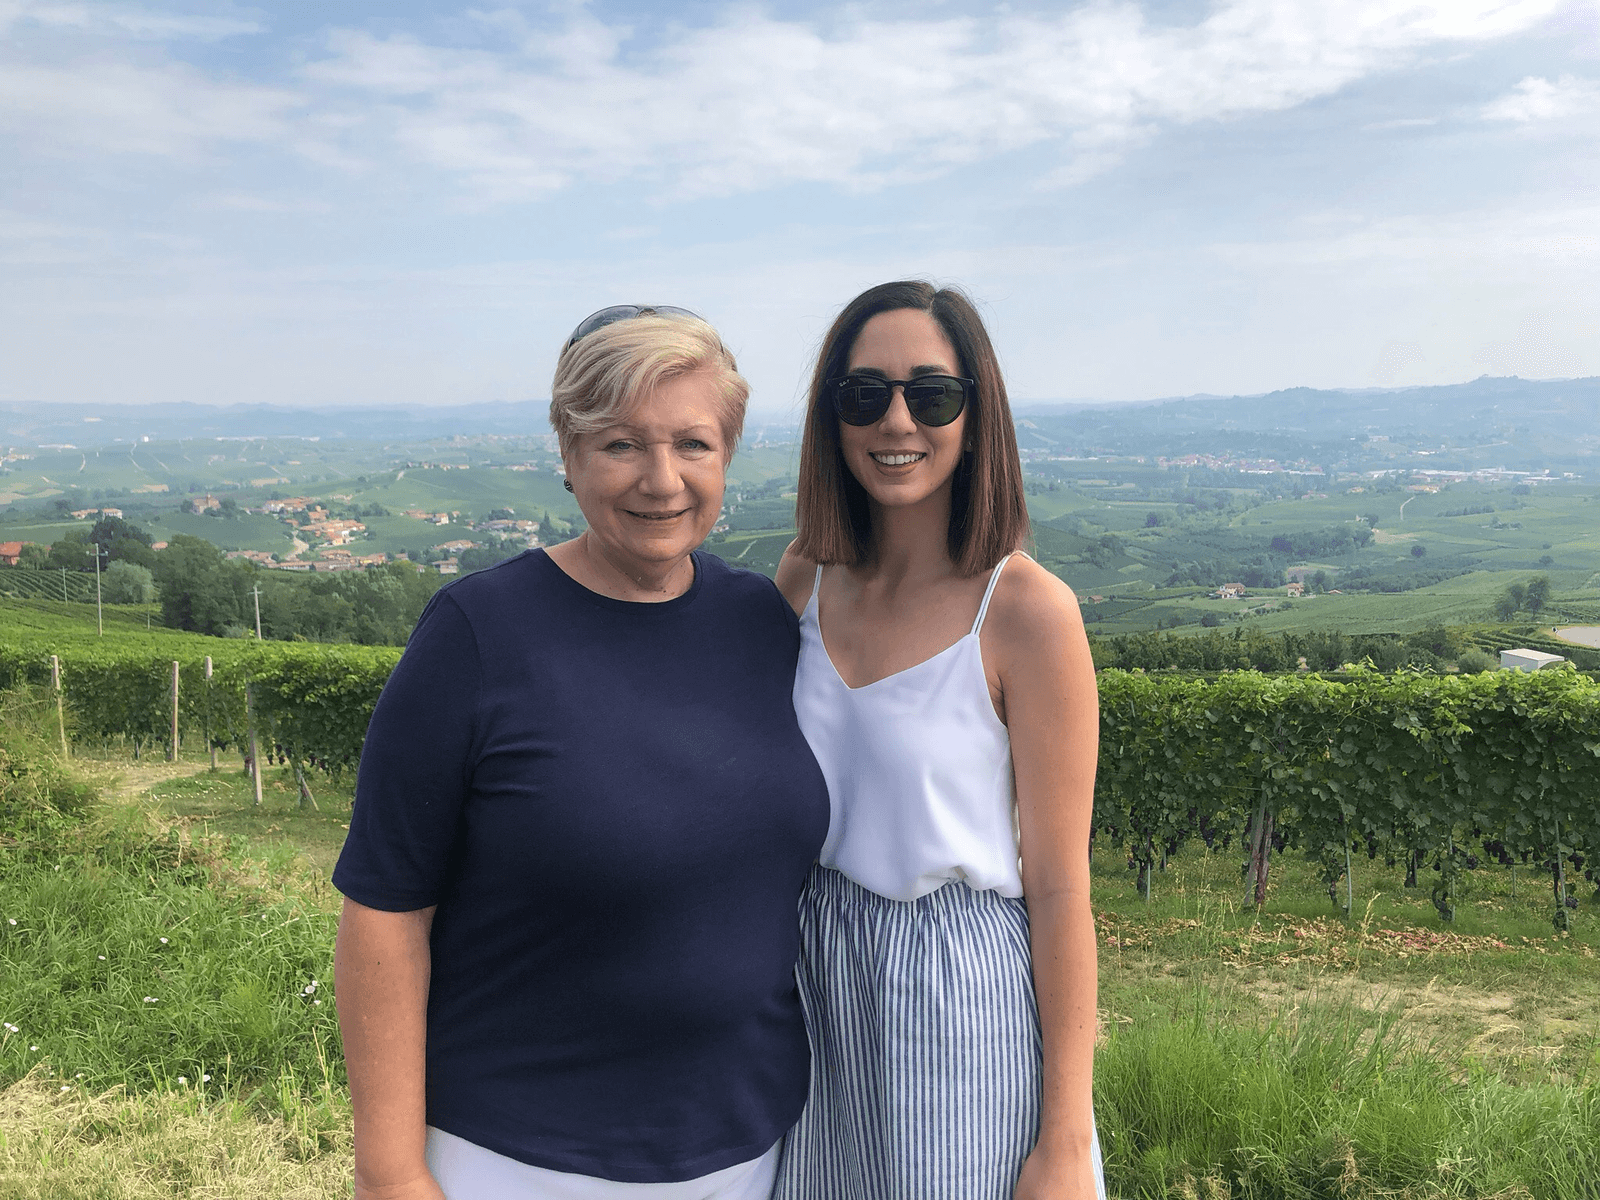 Maintaining Positivity: A Mother and Daughter’s Perspective on Chronic Pain Due to Osteoarthritis